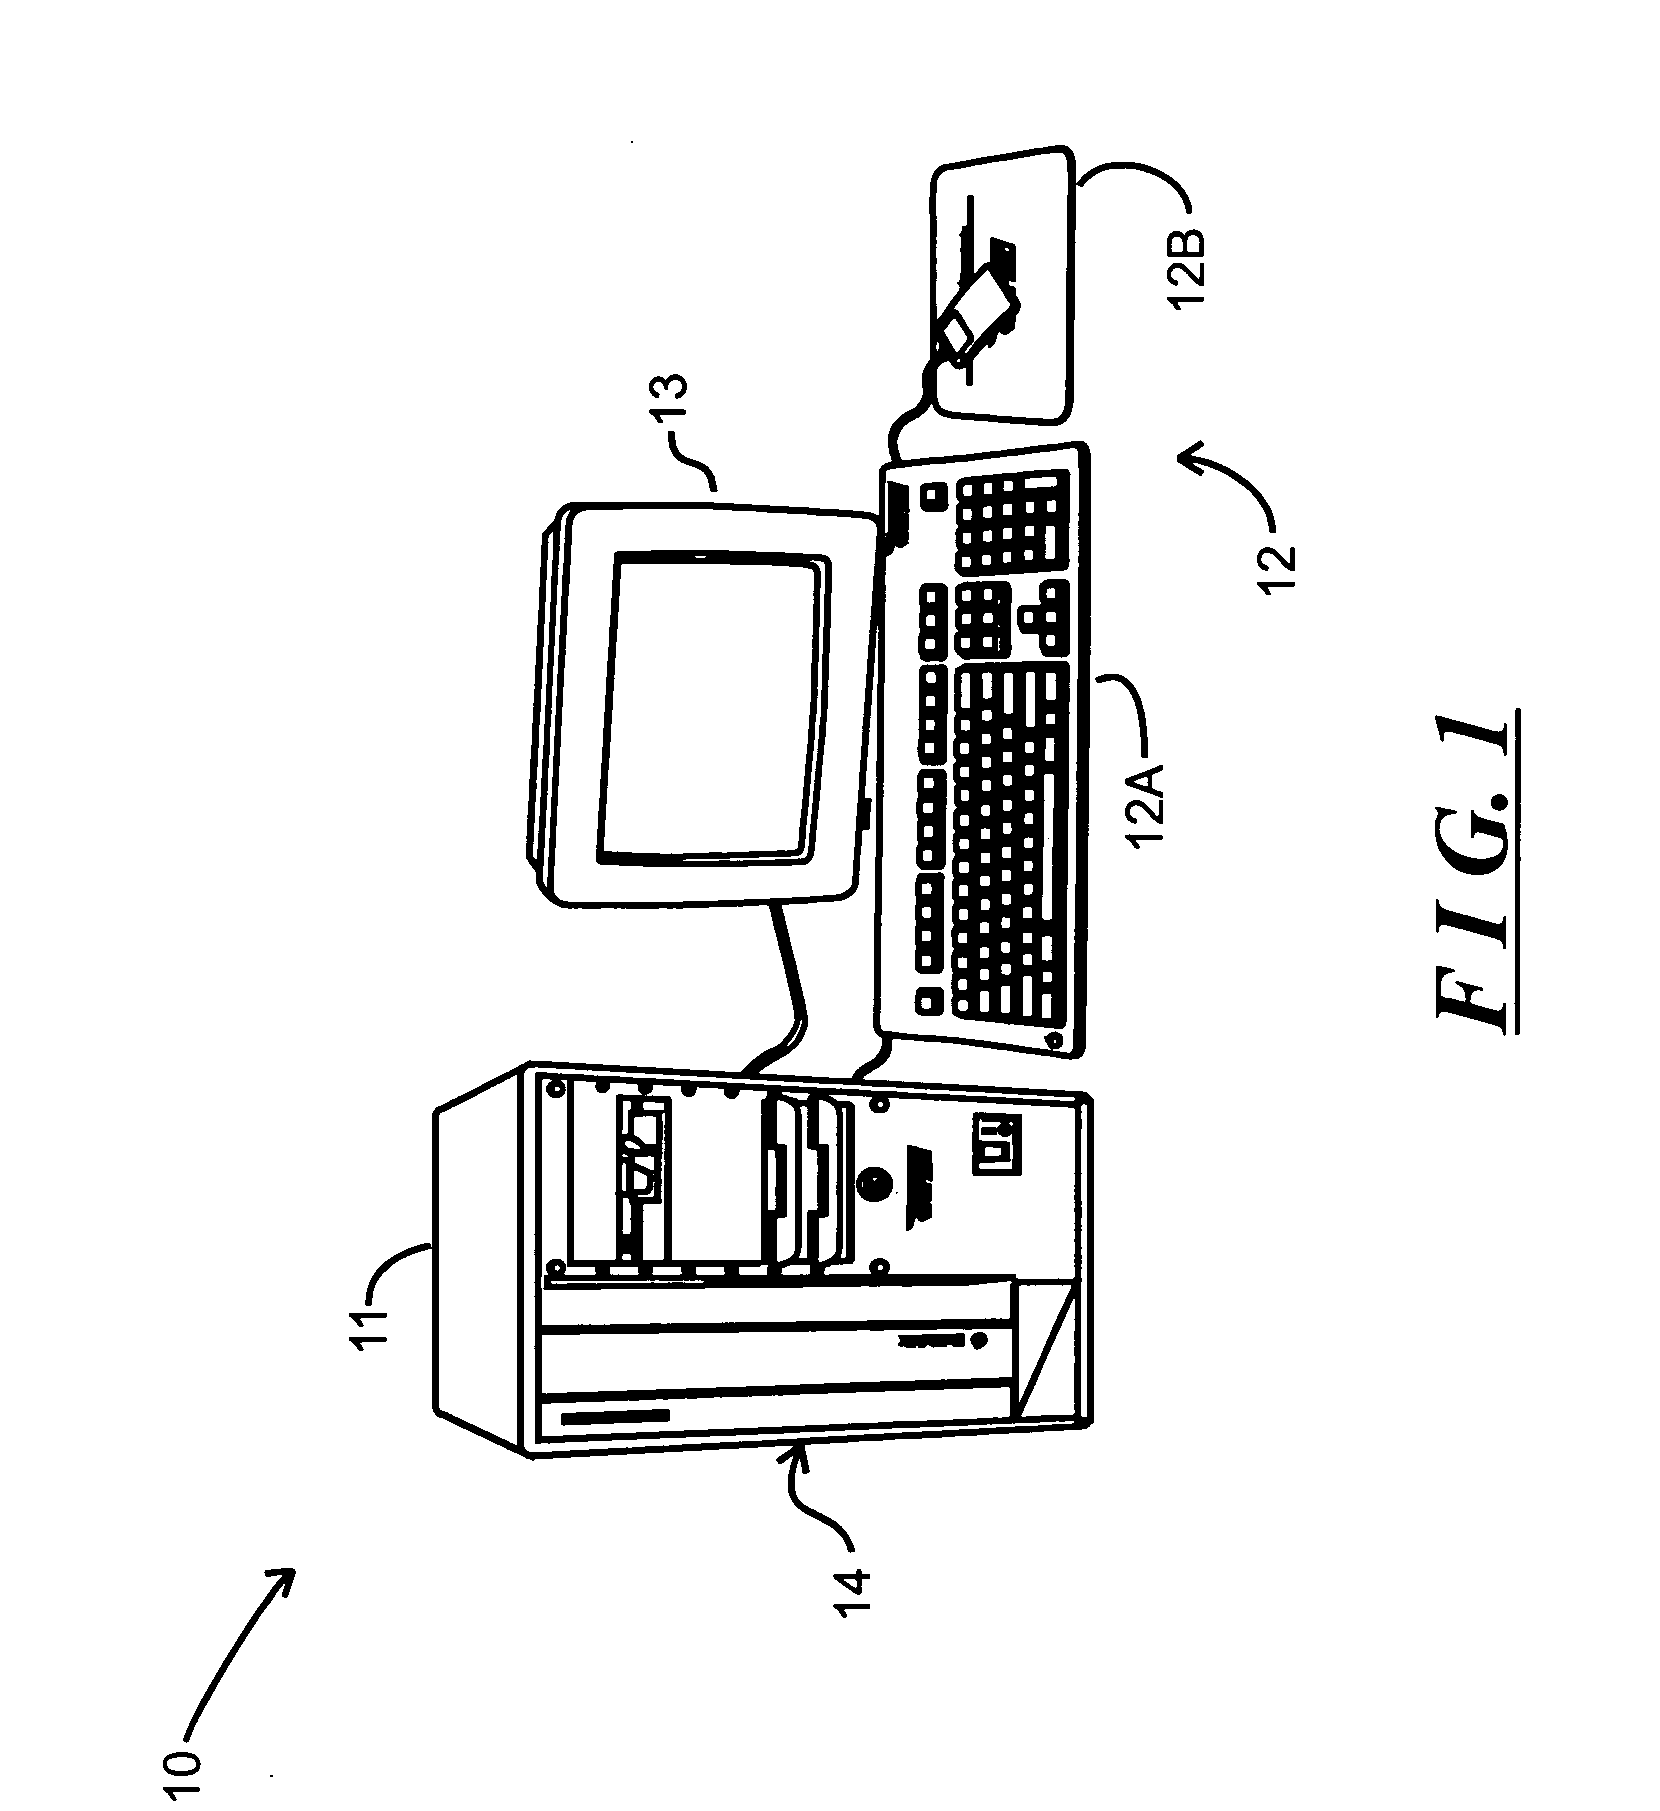 System and method for generating pixel values for pixels in an image using strictly deterministic methodologies for generating sample points